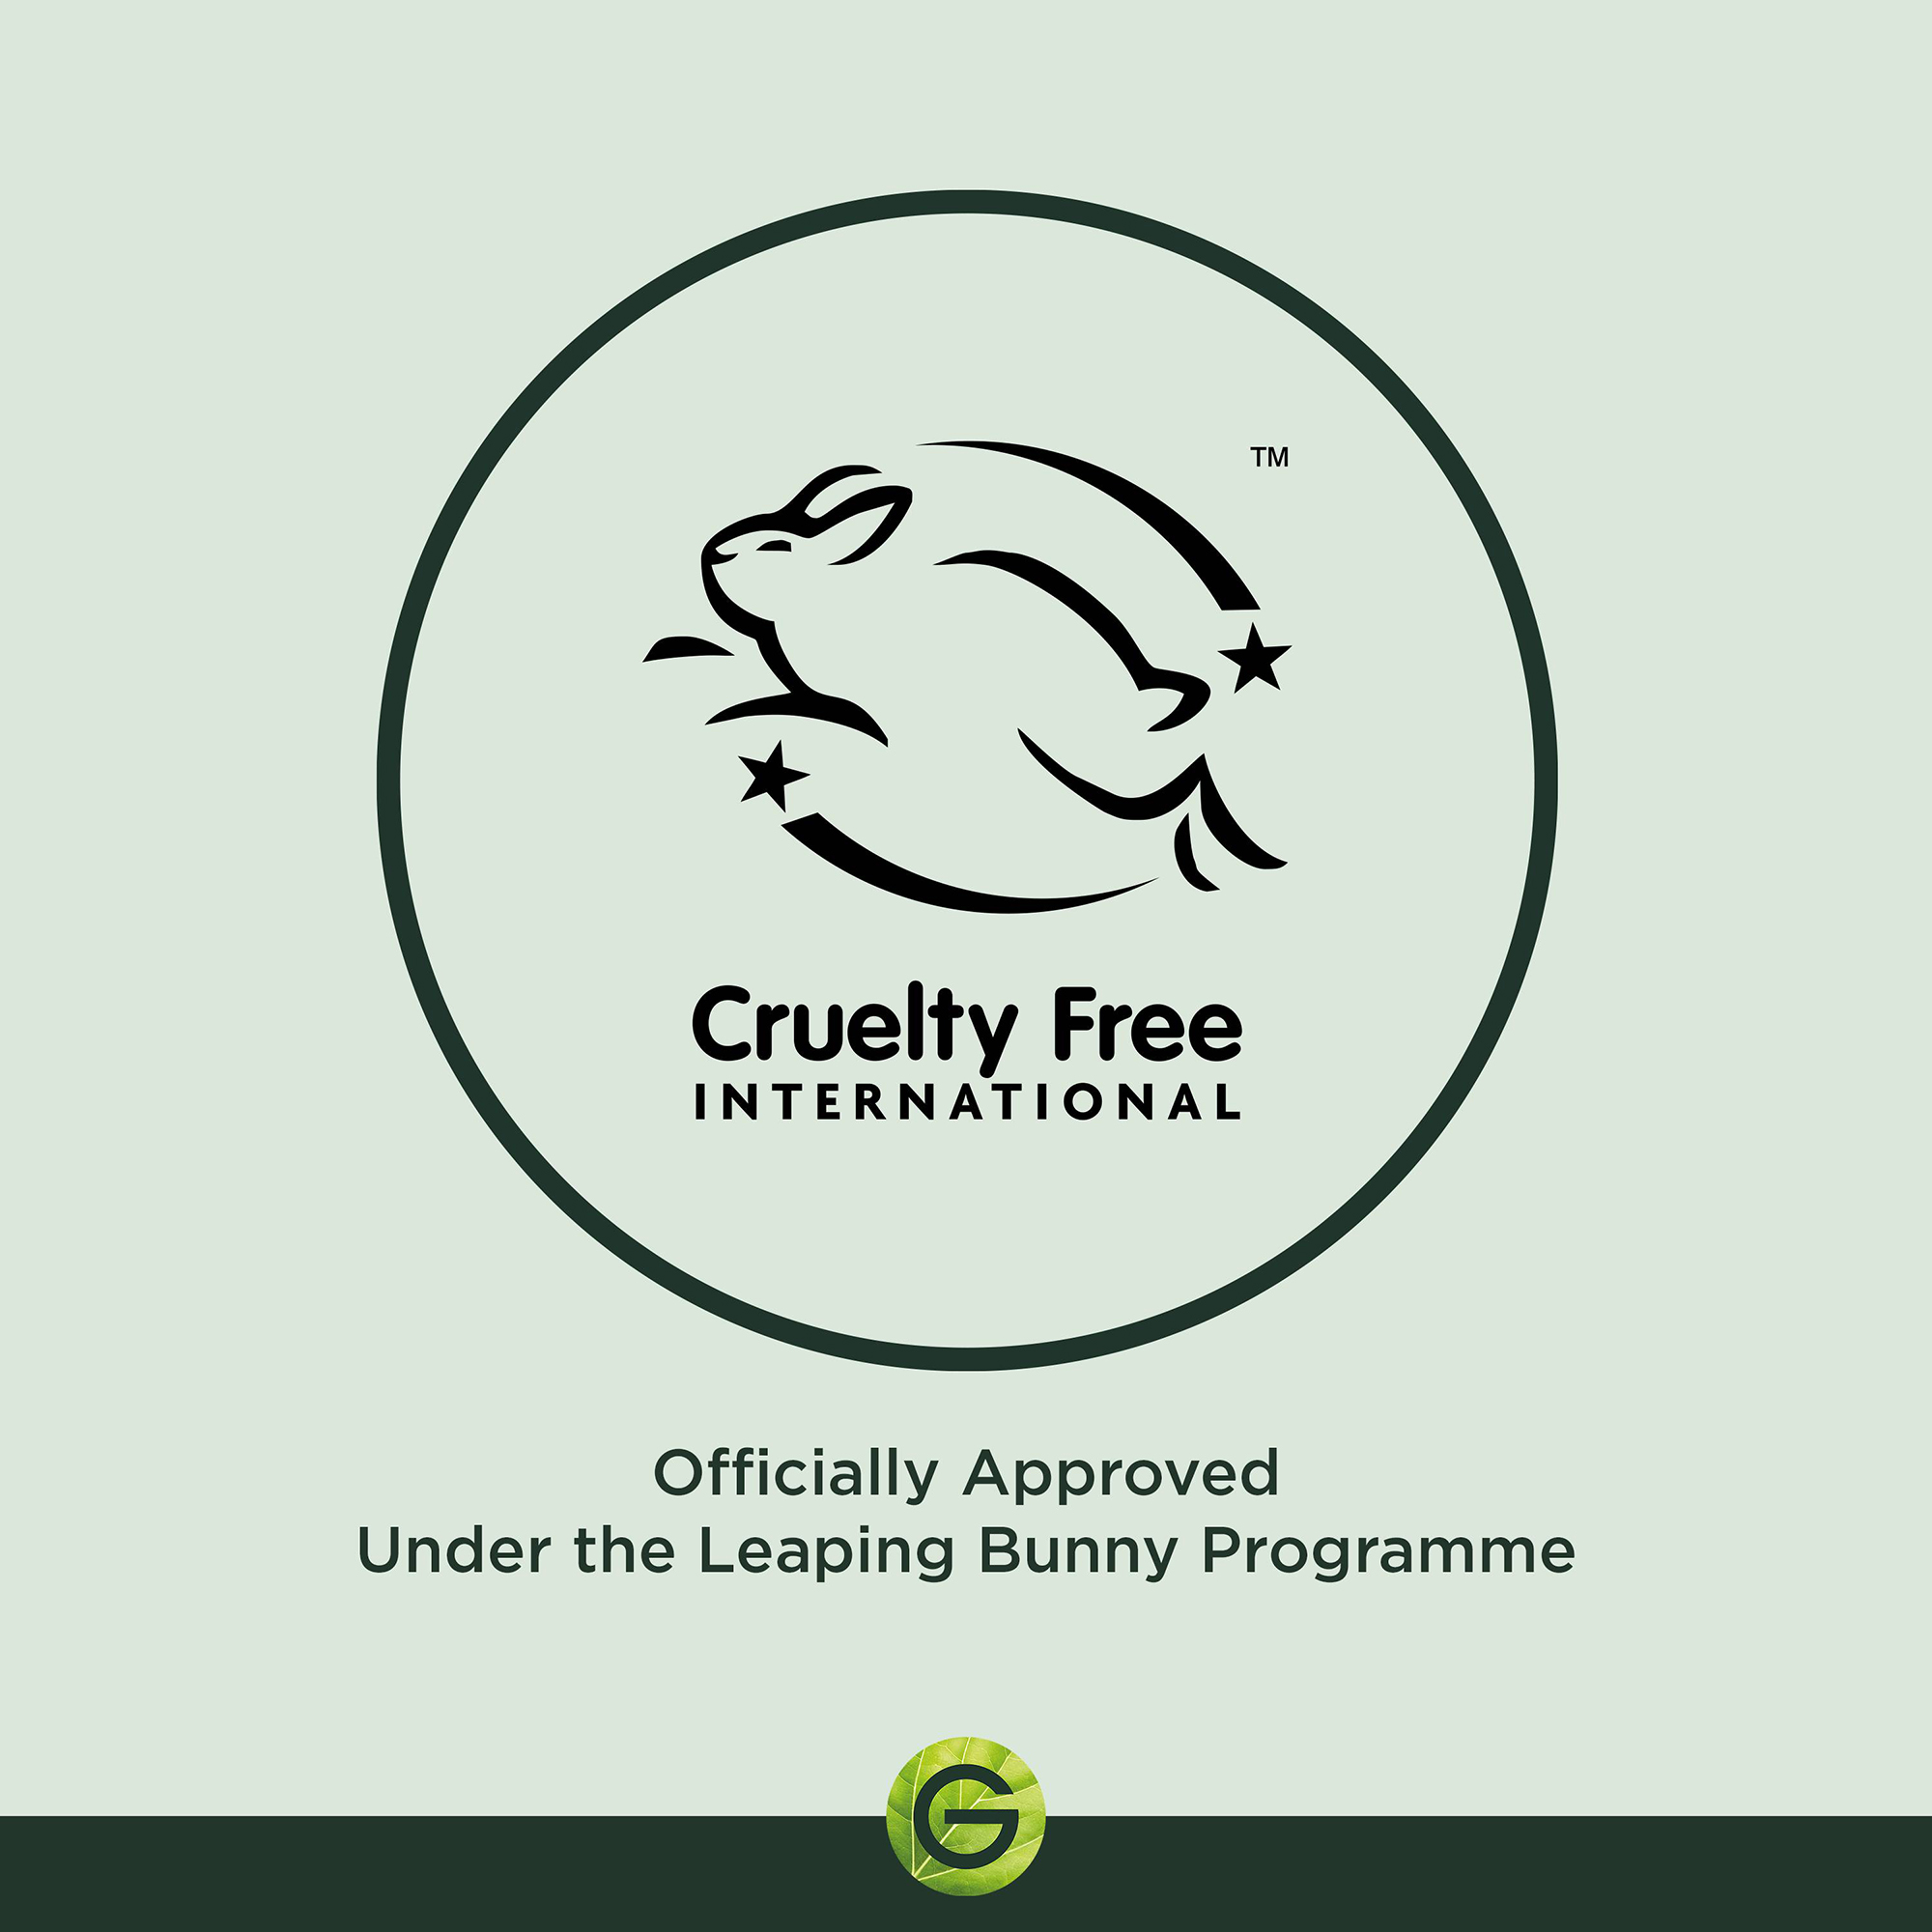 Cruelty free international officially approved under the leaping bunny programme